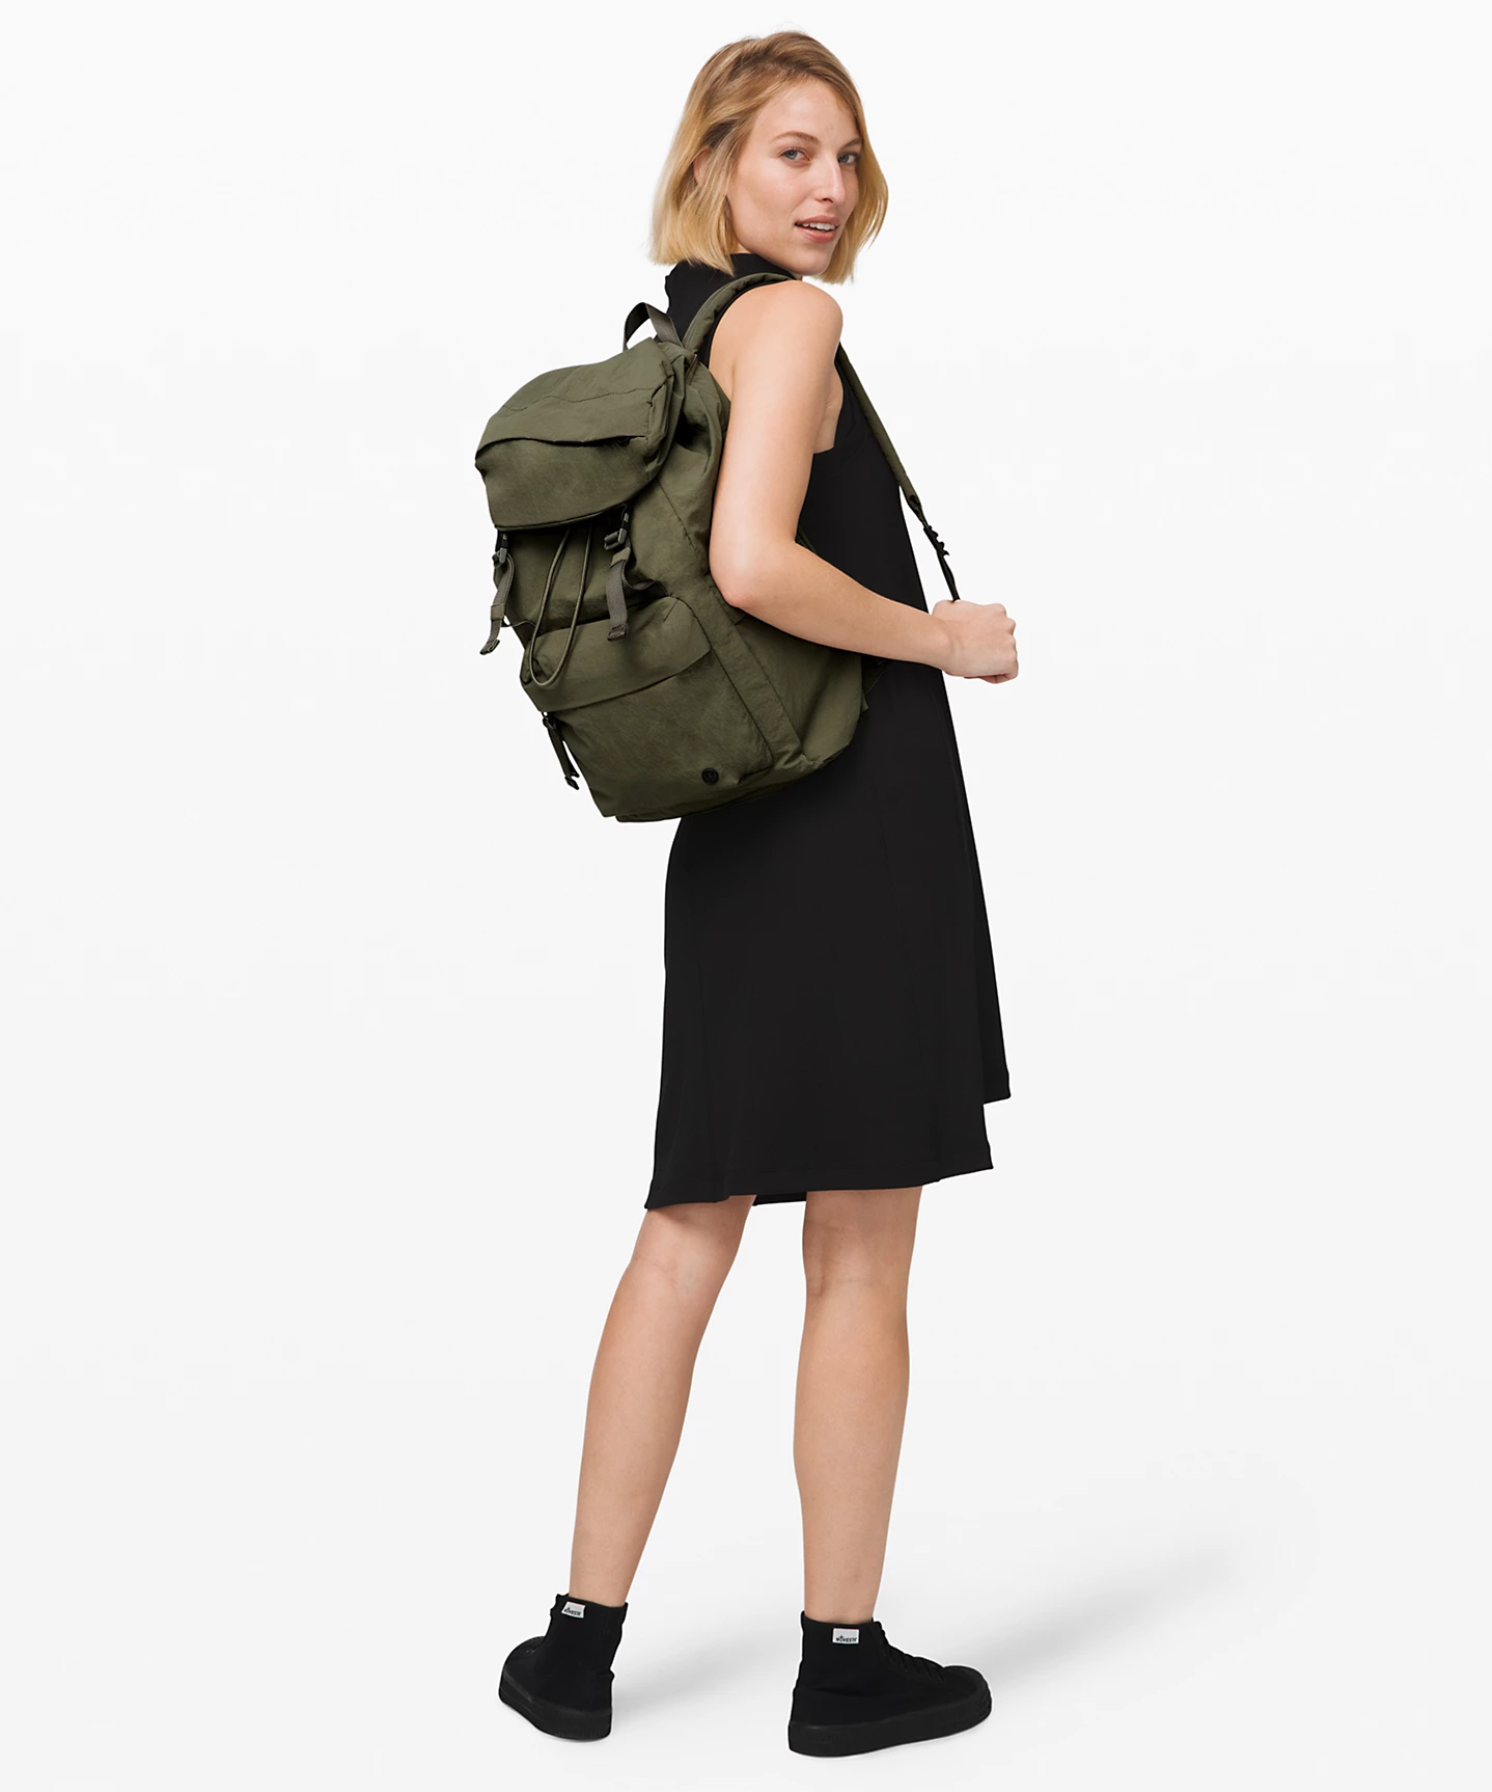 on my level backpack lululemon review